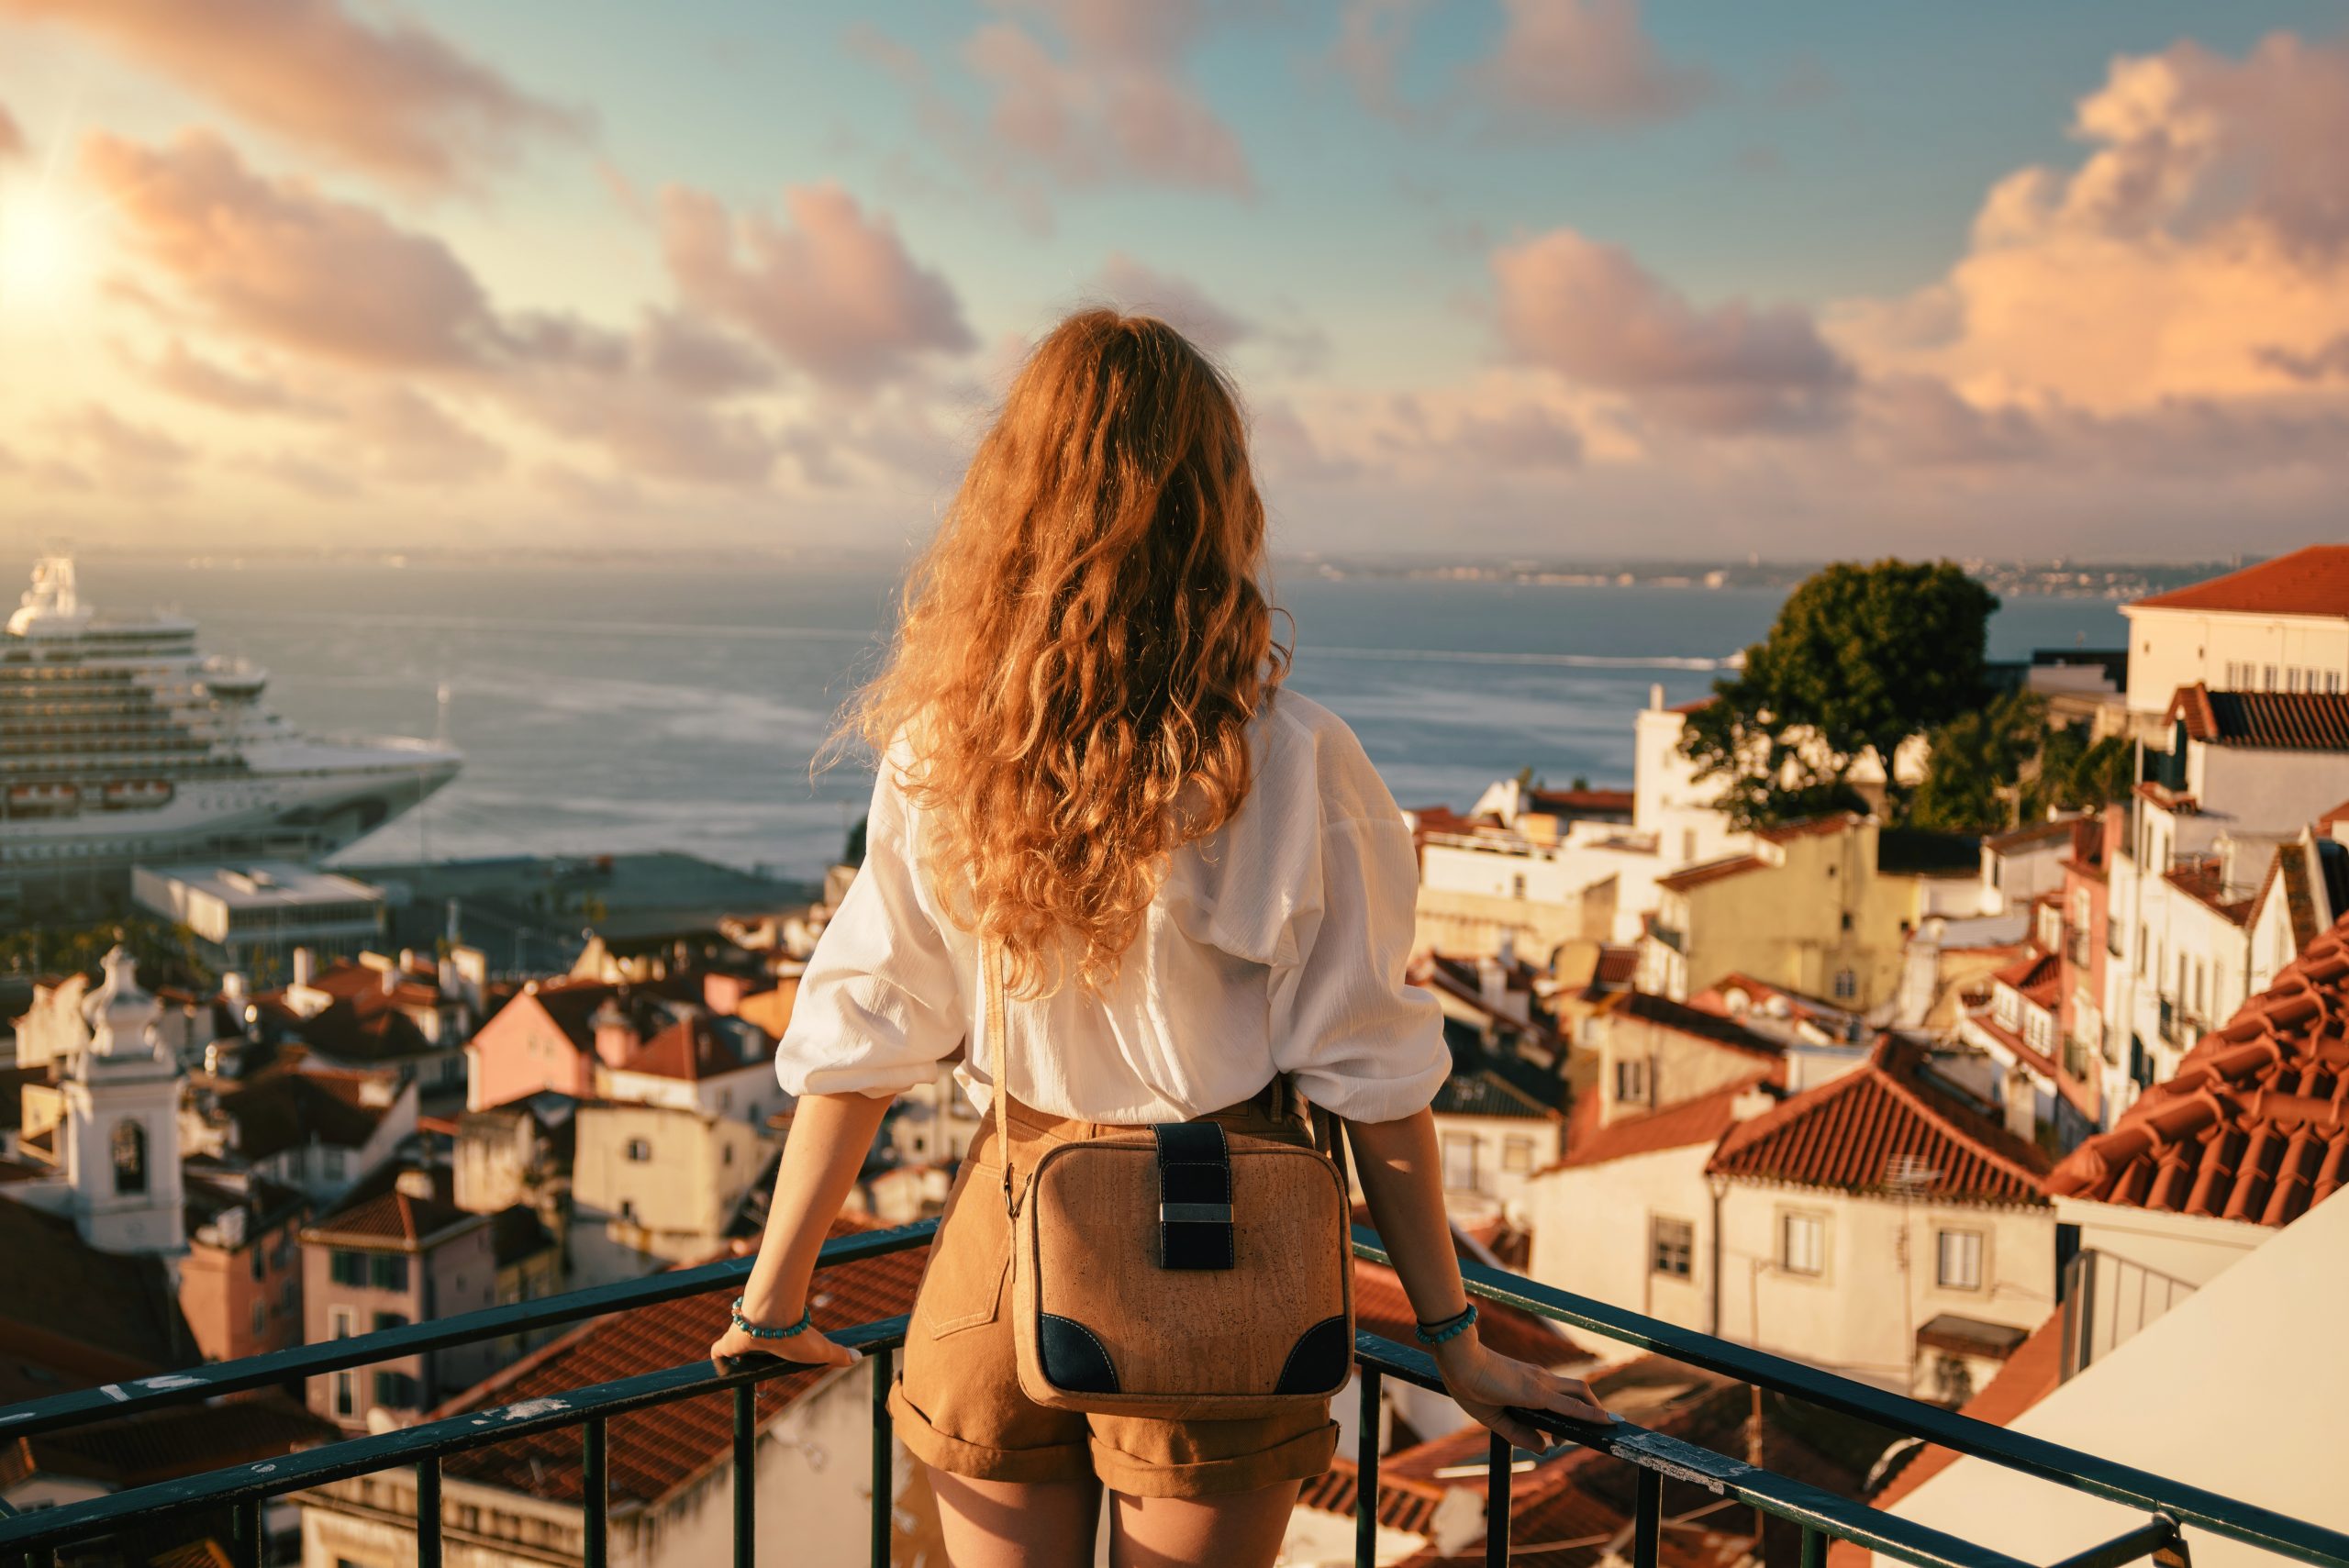 A young female tourist standing on a platform surrounded by fences and observing Lisbon at daytime in Portugal